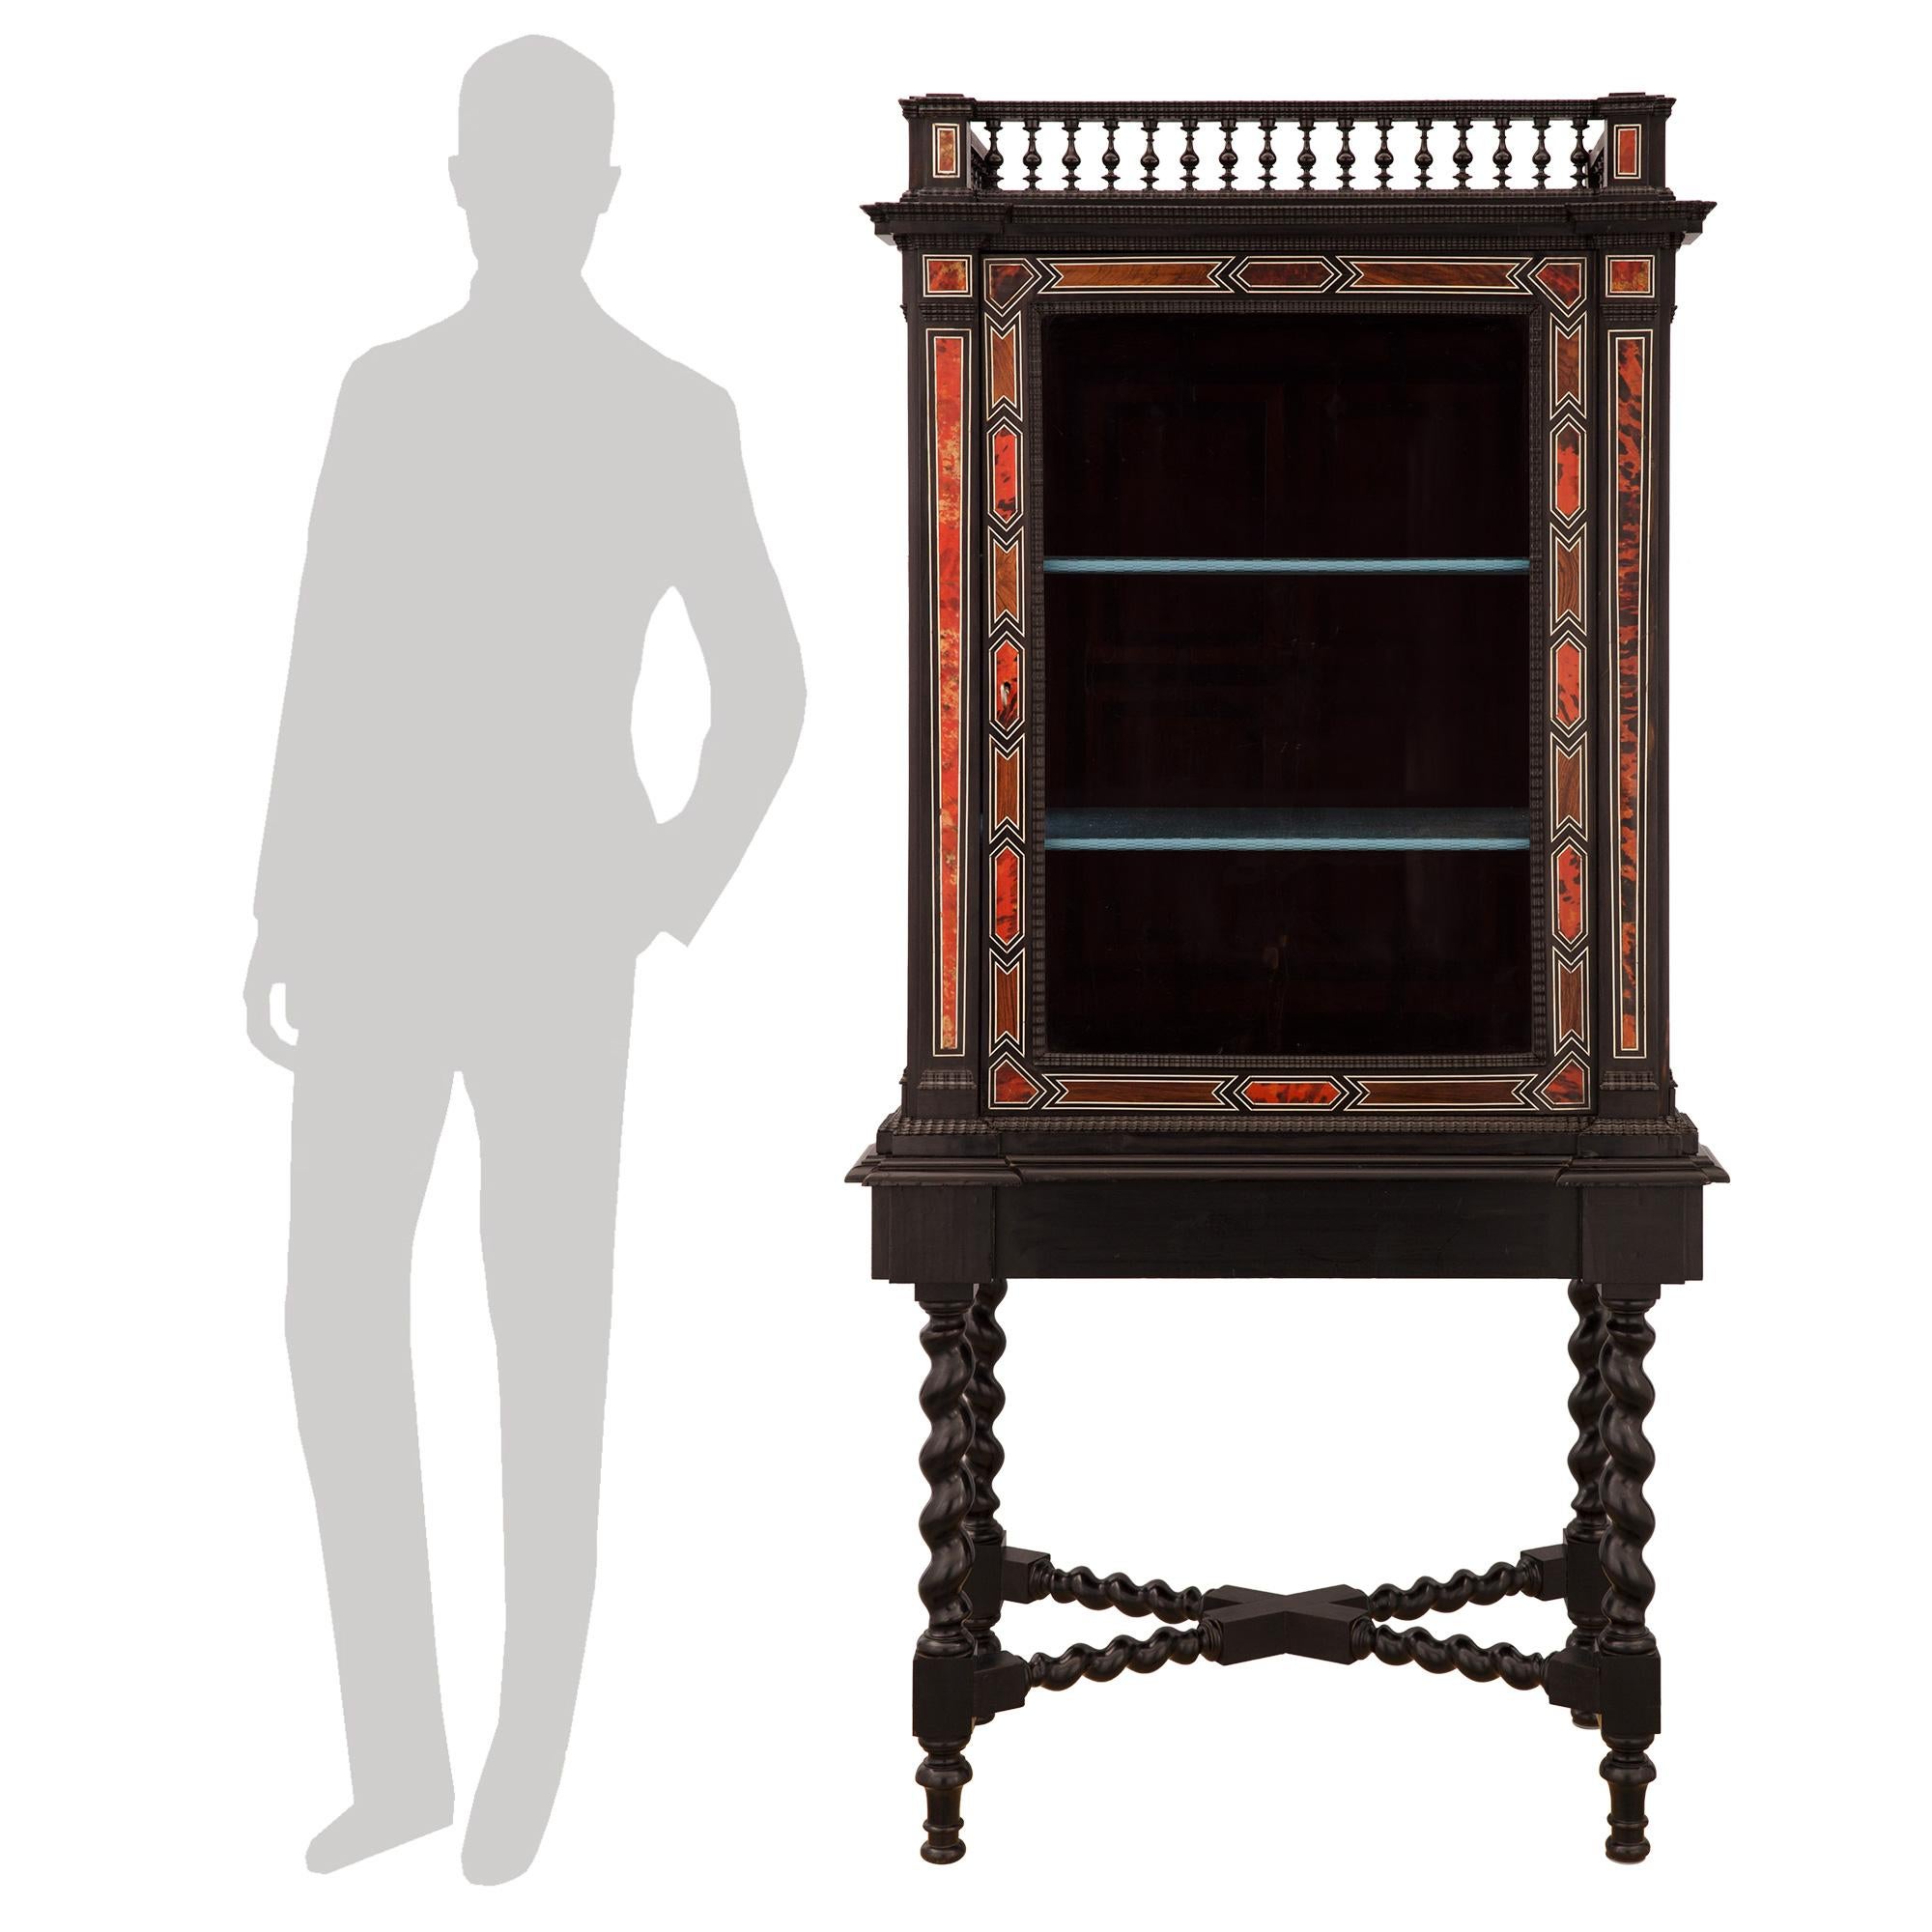 An impressive and most decorative Italian late 18th century Baroque st. ebony, rosewood, tortoiseshell, and bone cabinet vitrine. The vitrine is raised by elegant turned feet below block reserves and striking most decorative spiraled legs, each